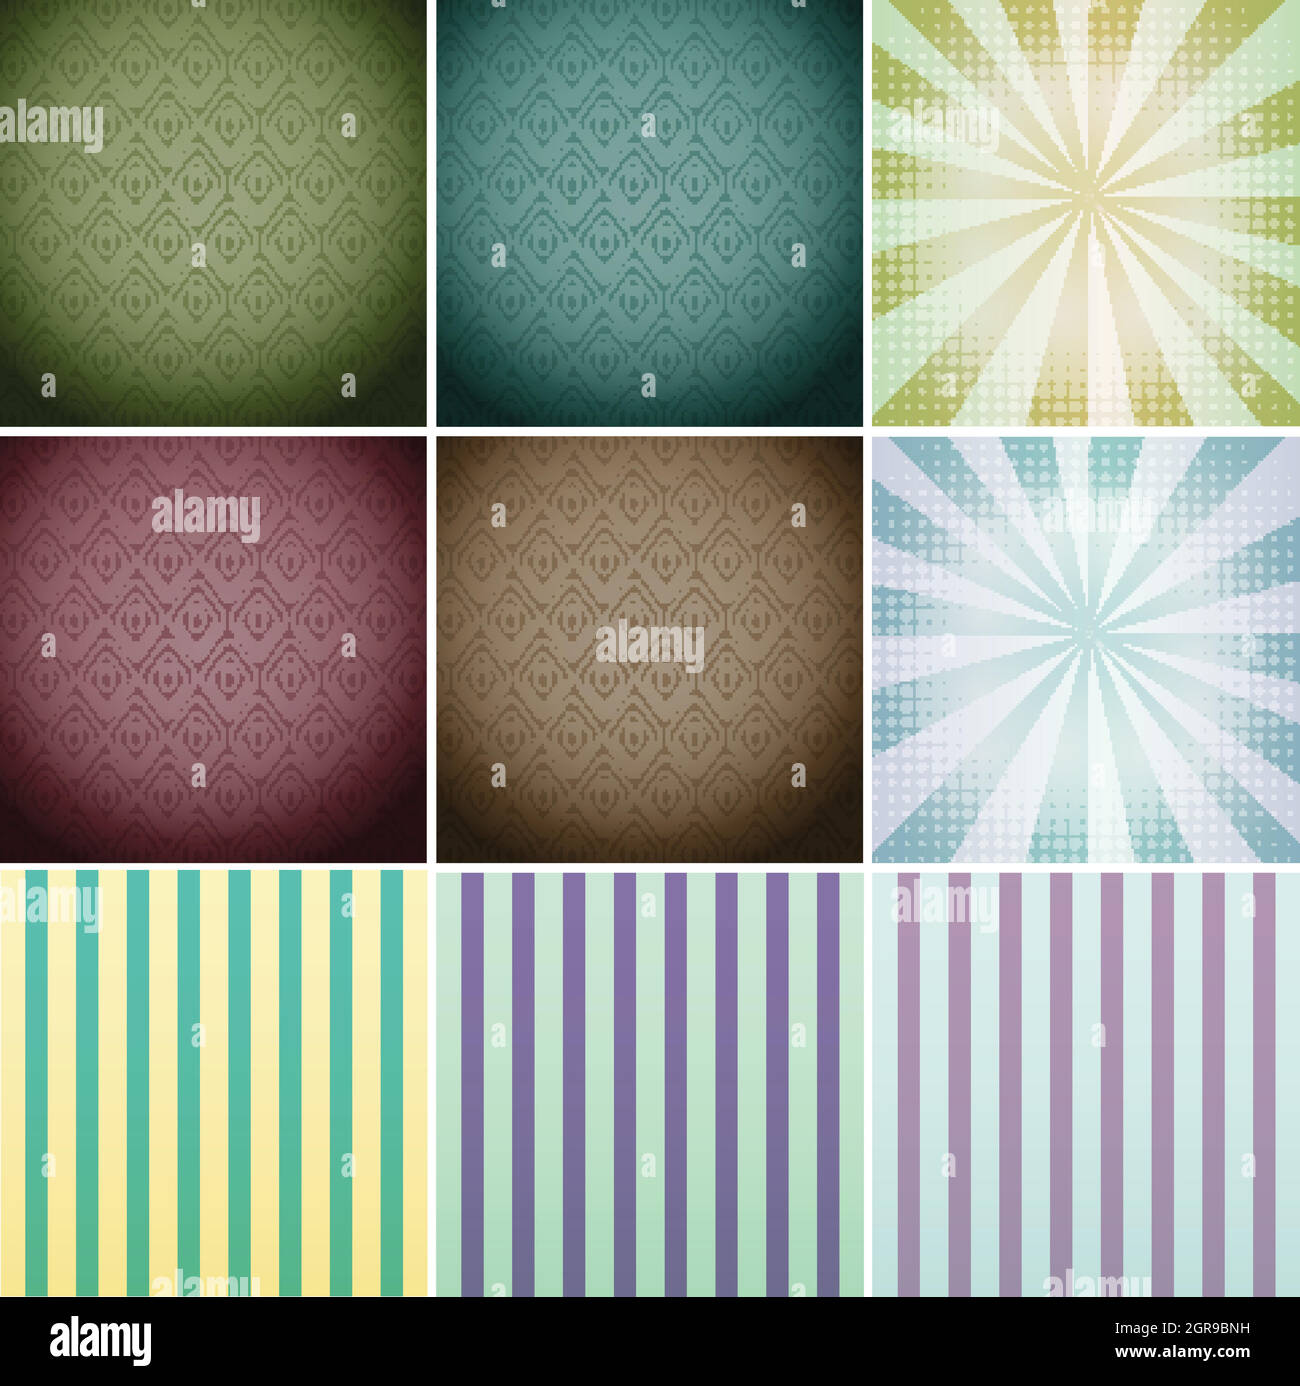 Different design of wallpapers Stock Vector